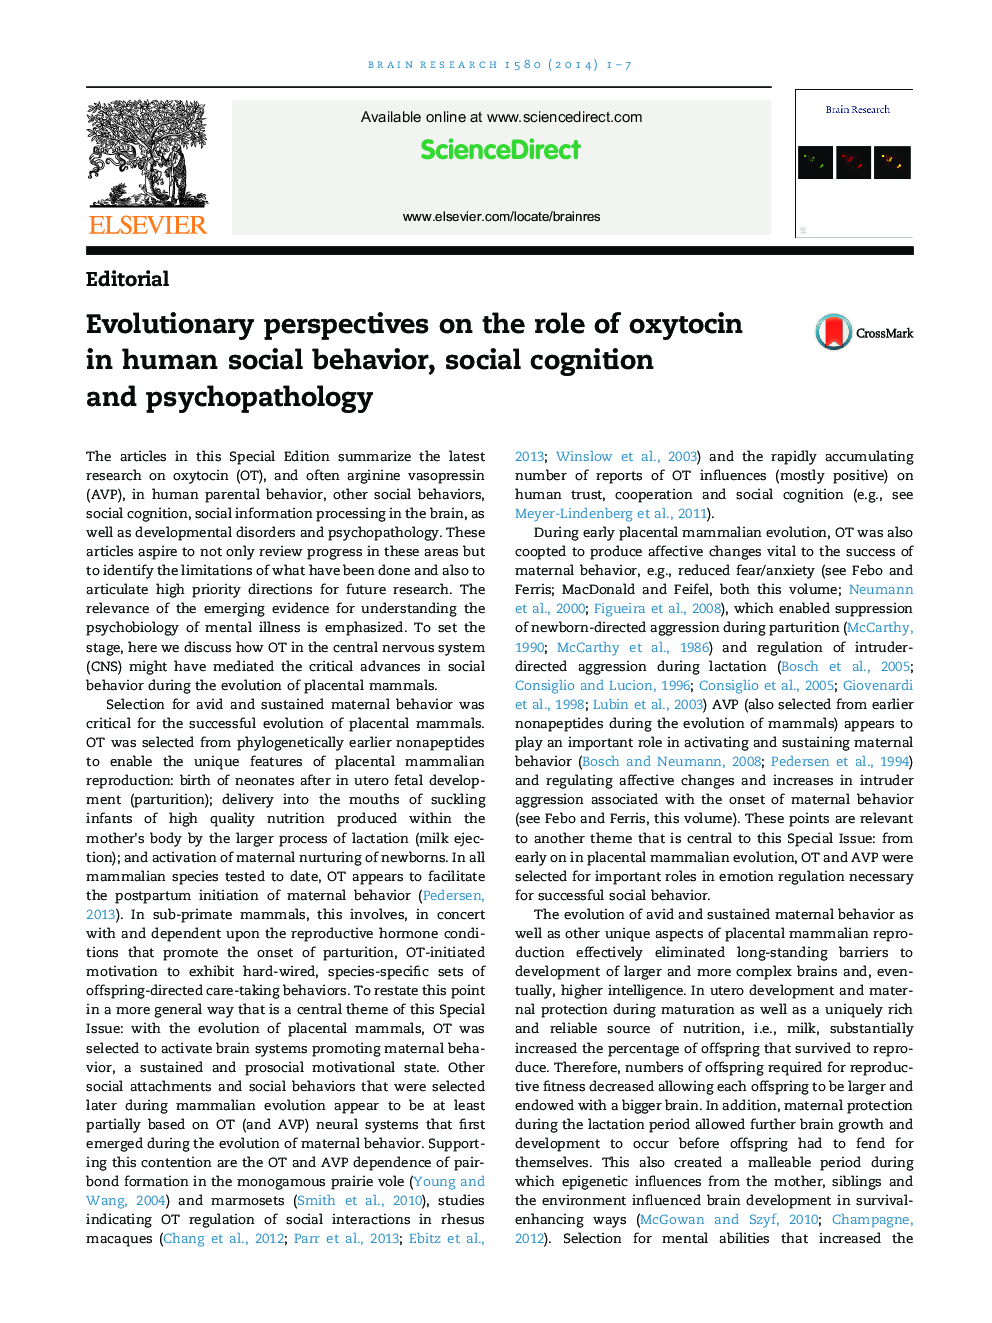 Evolutionary perspectives on the role of oxytocin in human social behavior, social cognition and psychopathology